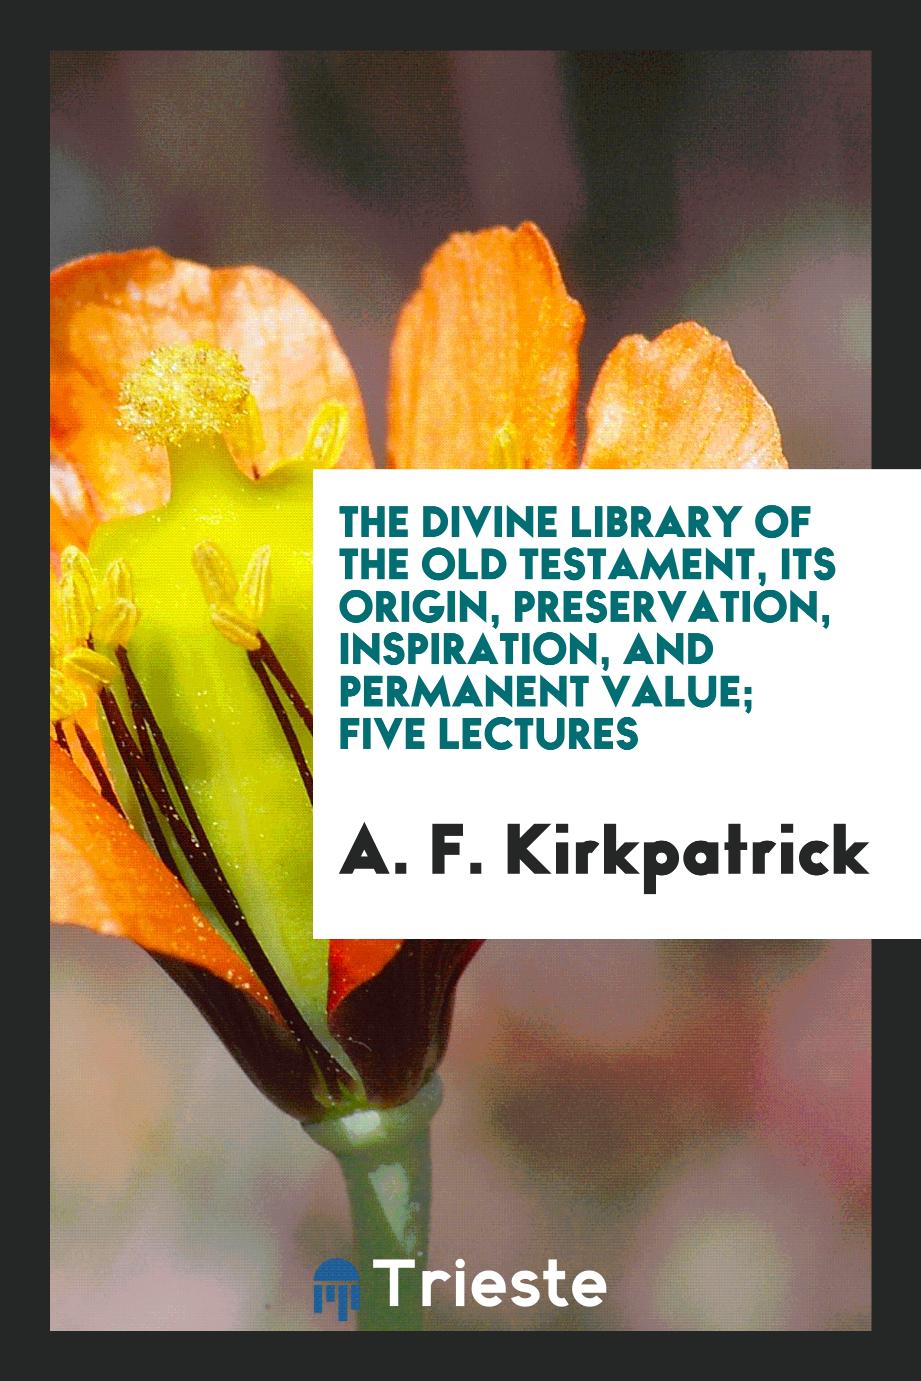 The divine library of the Old Testament, its origin, preservation, inspiration, and permanent value; five lectures